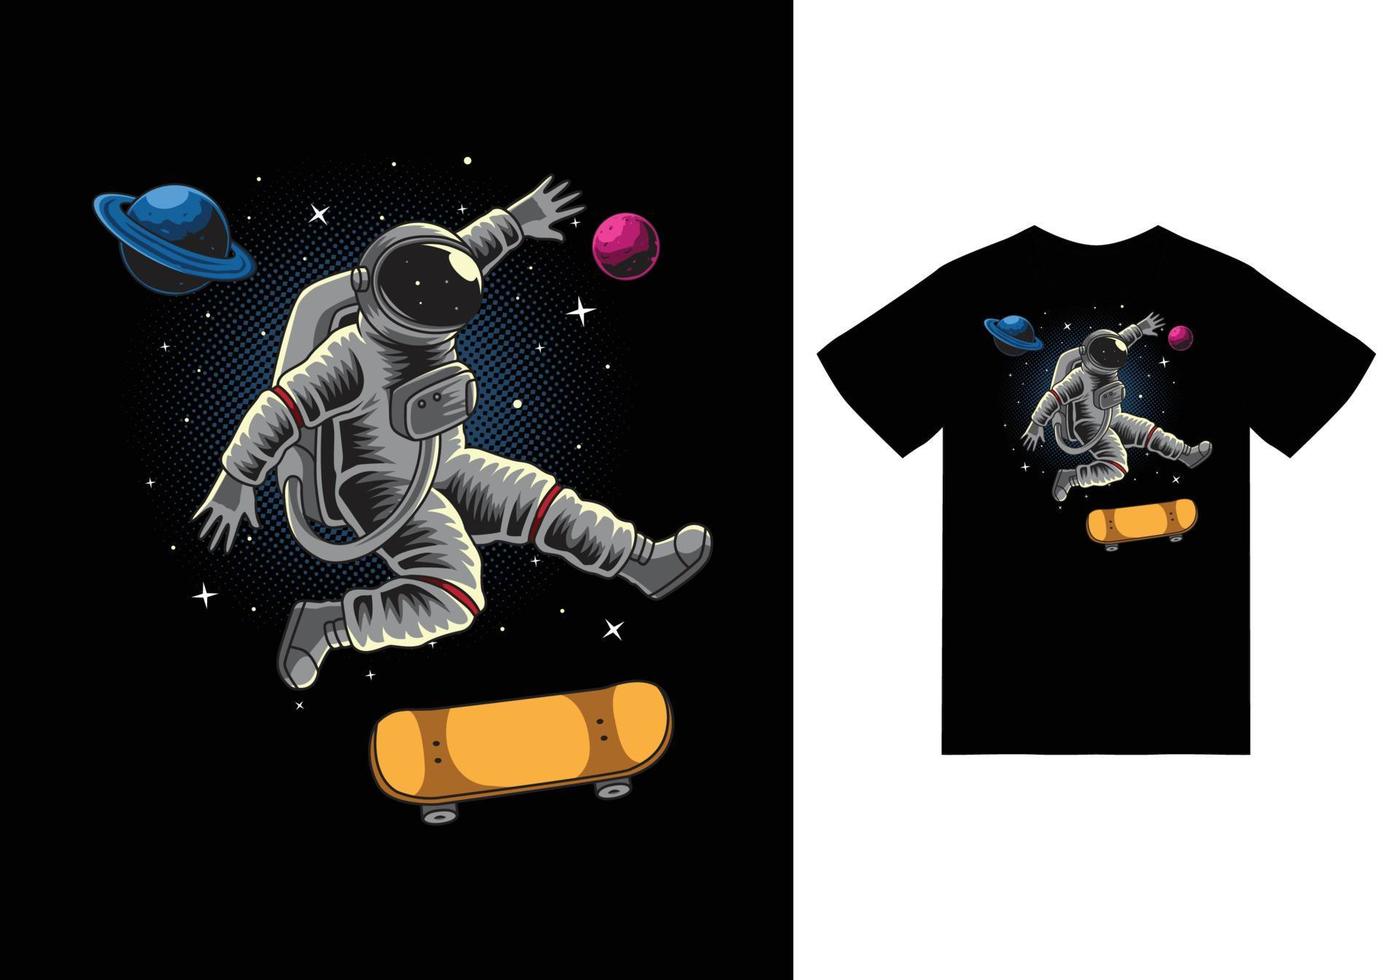 Astronaut playing skateboard in space illustration with tshirt design premium vector